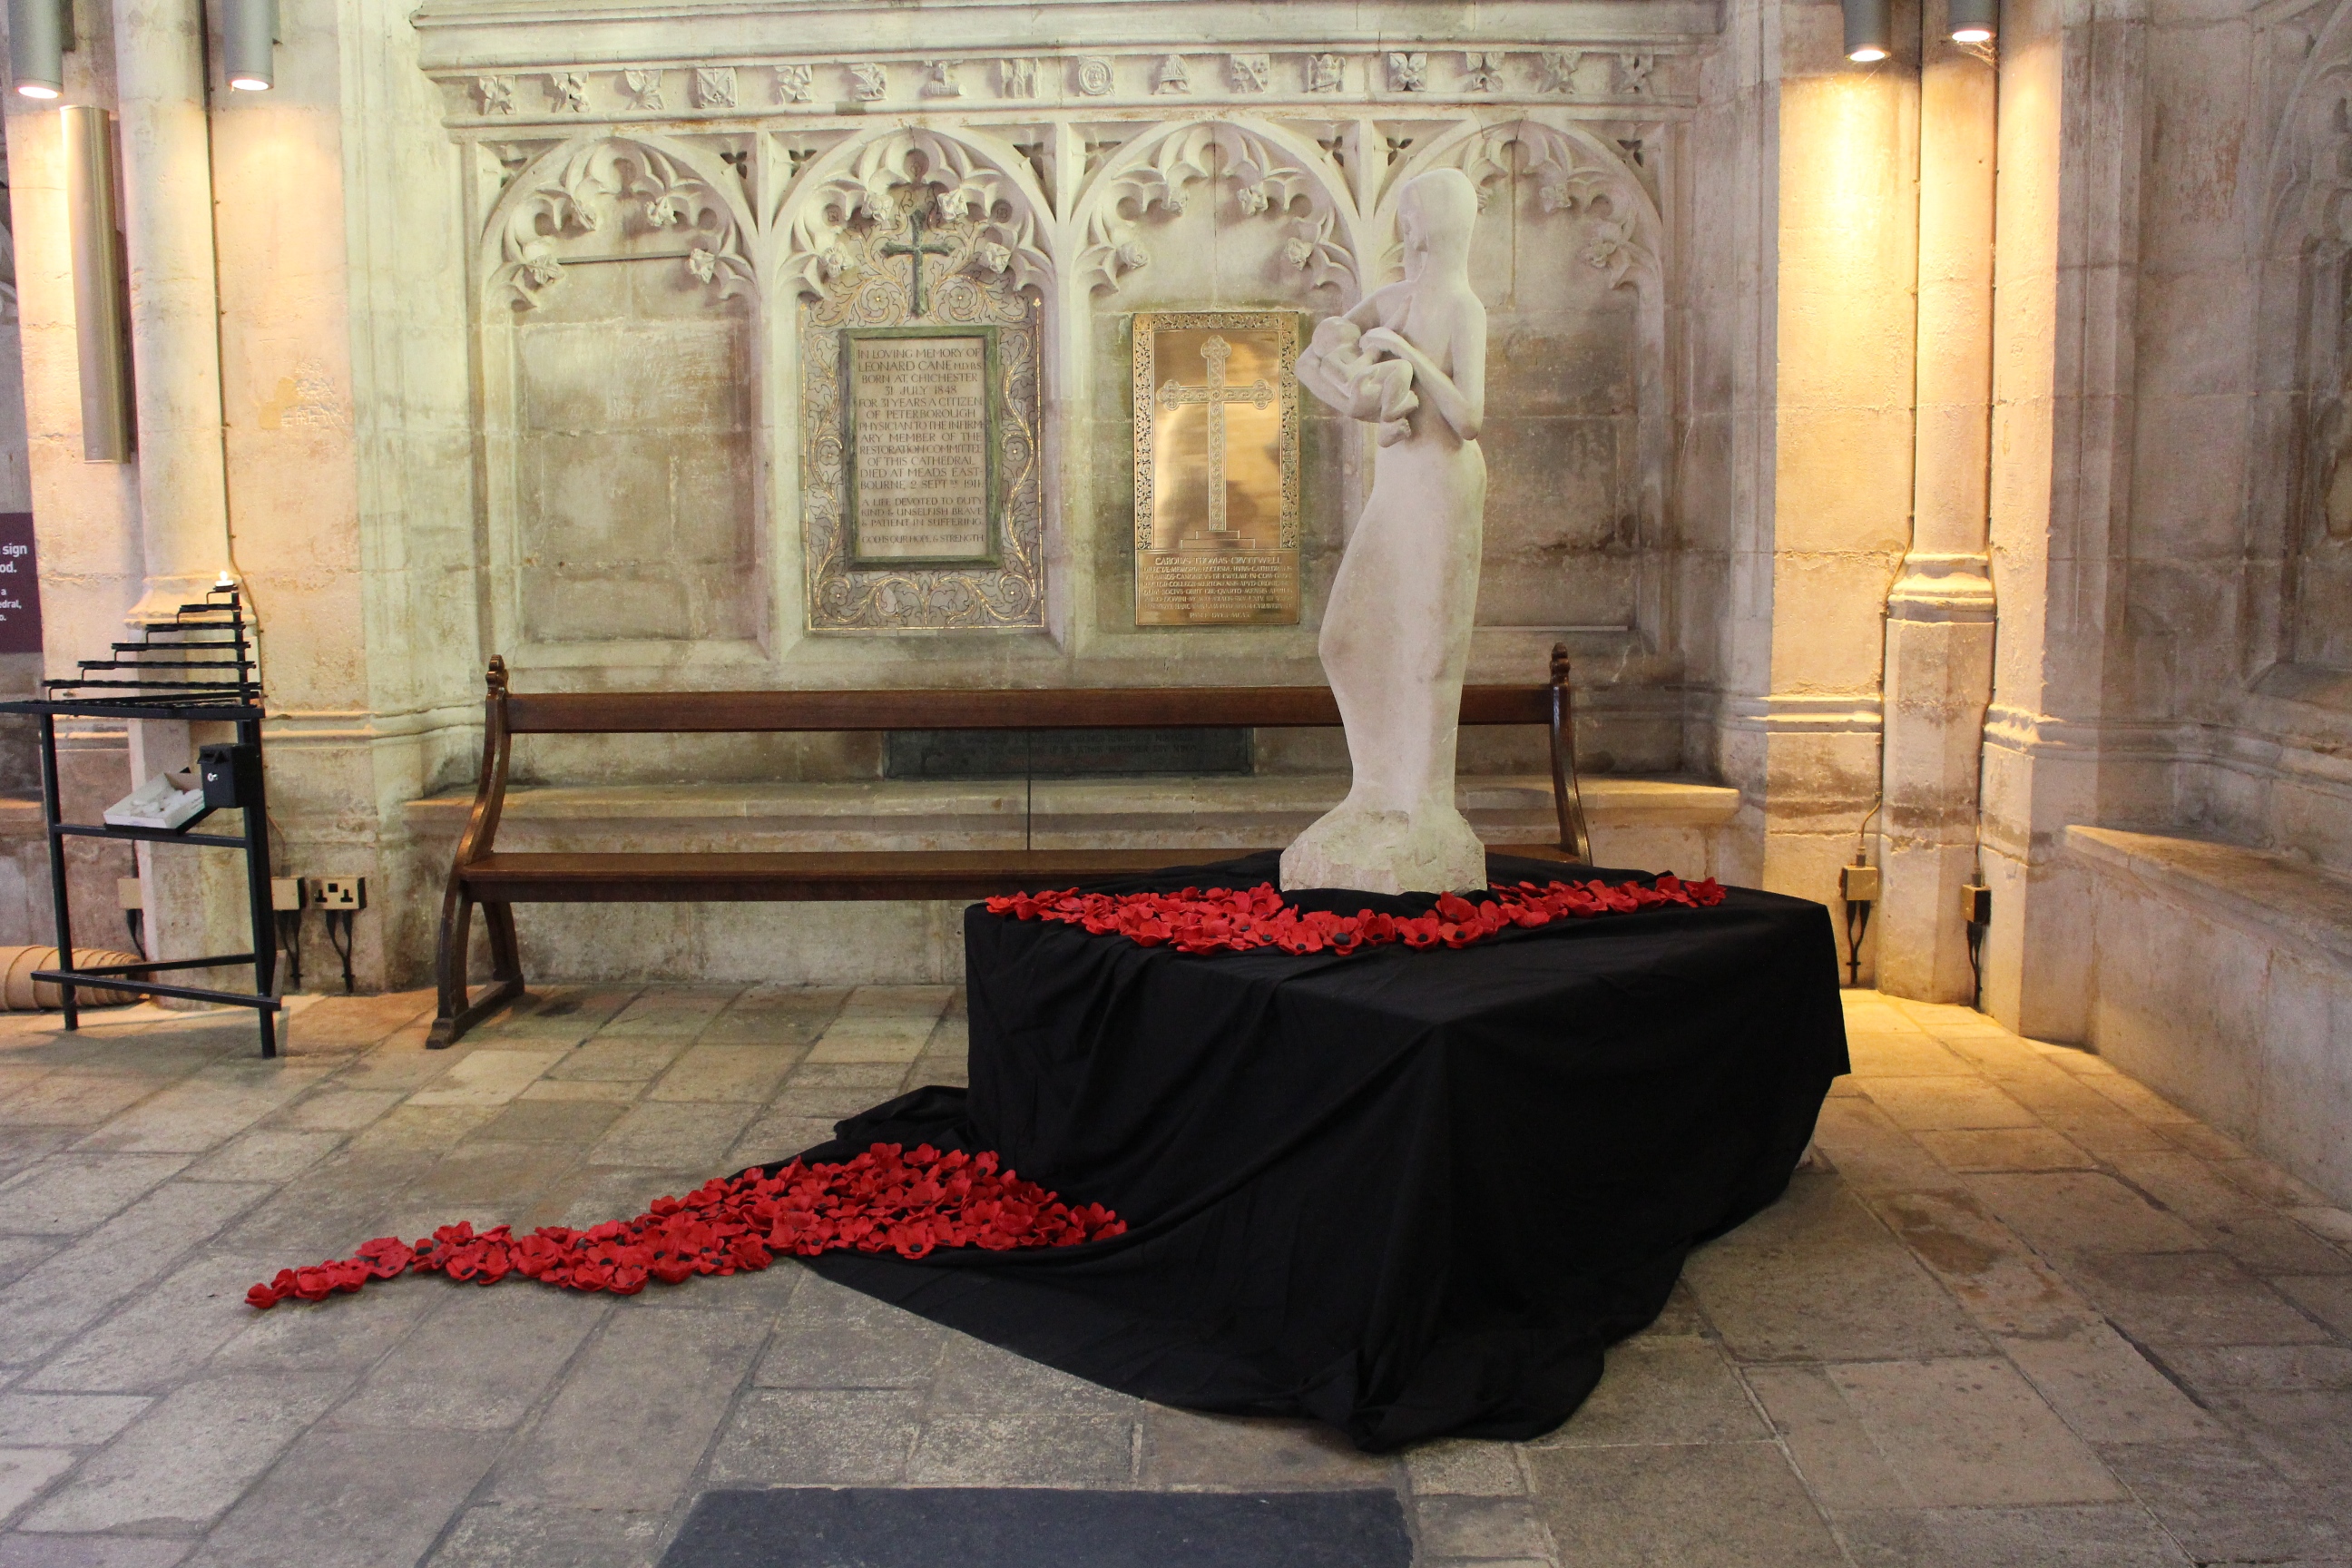 The path of poppies around the statue of Our Lady